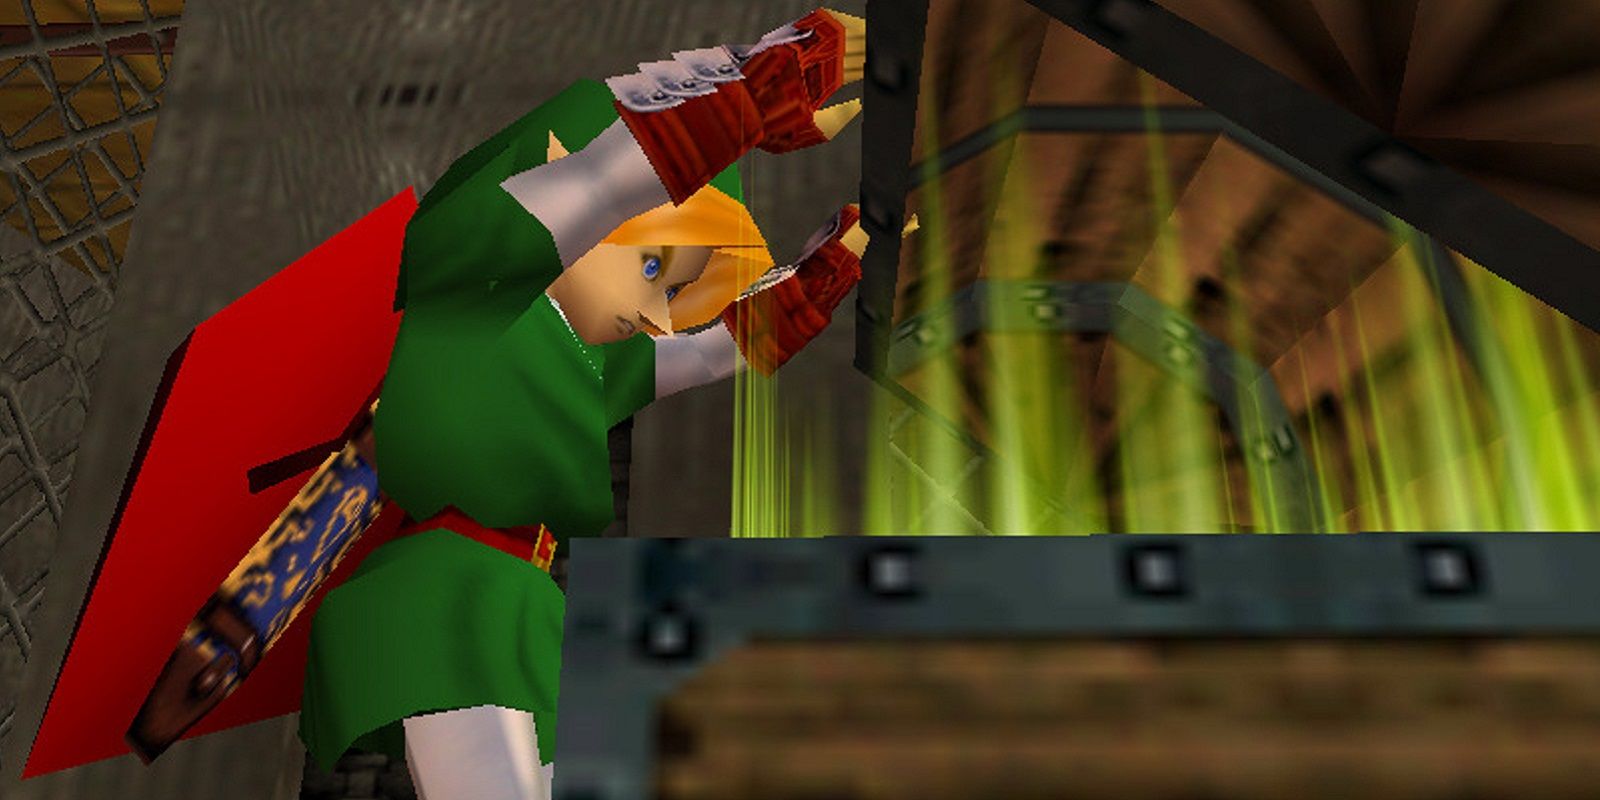 Link opens a chest in Ocarina of Time